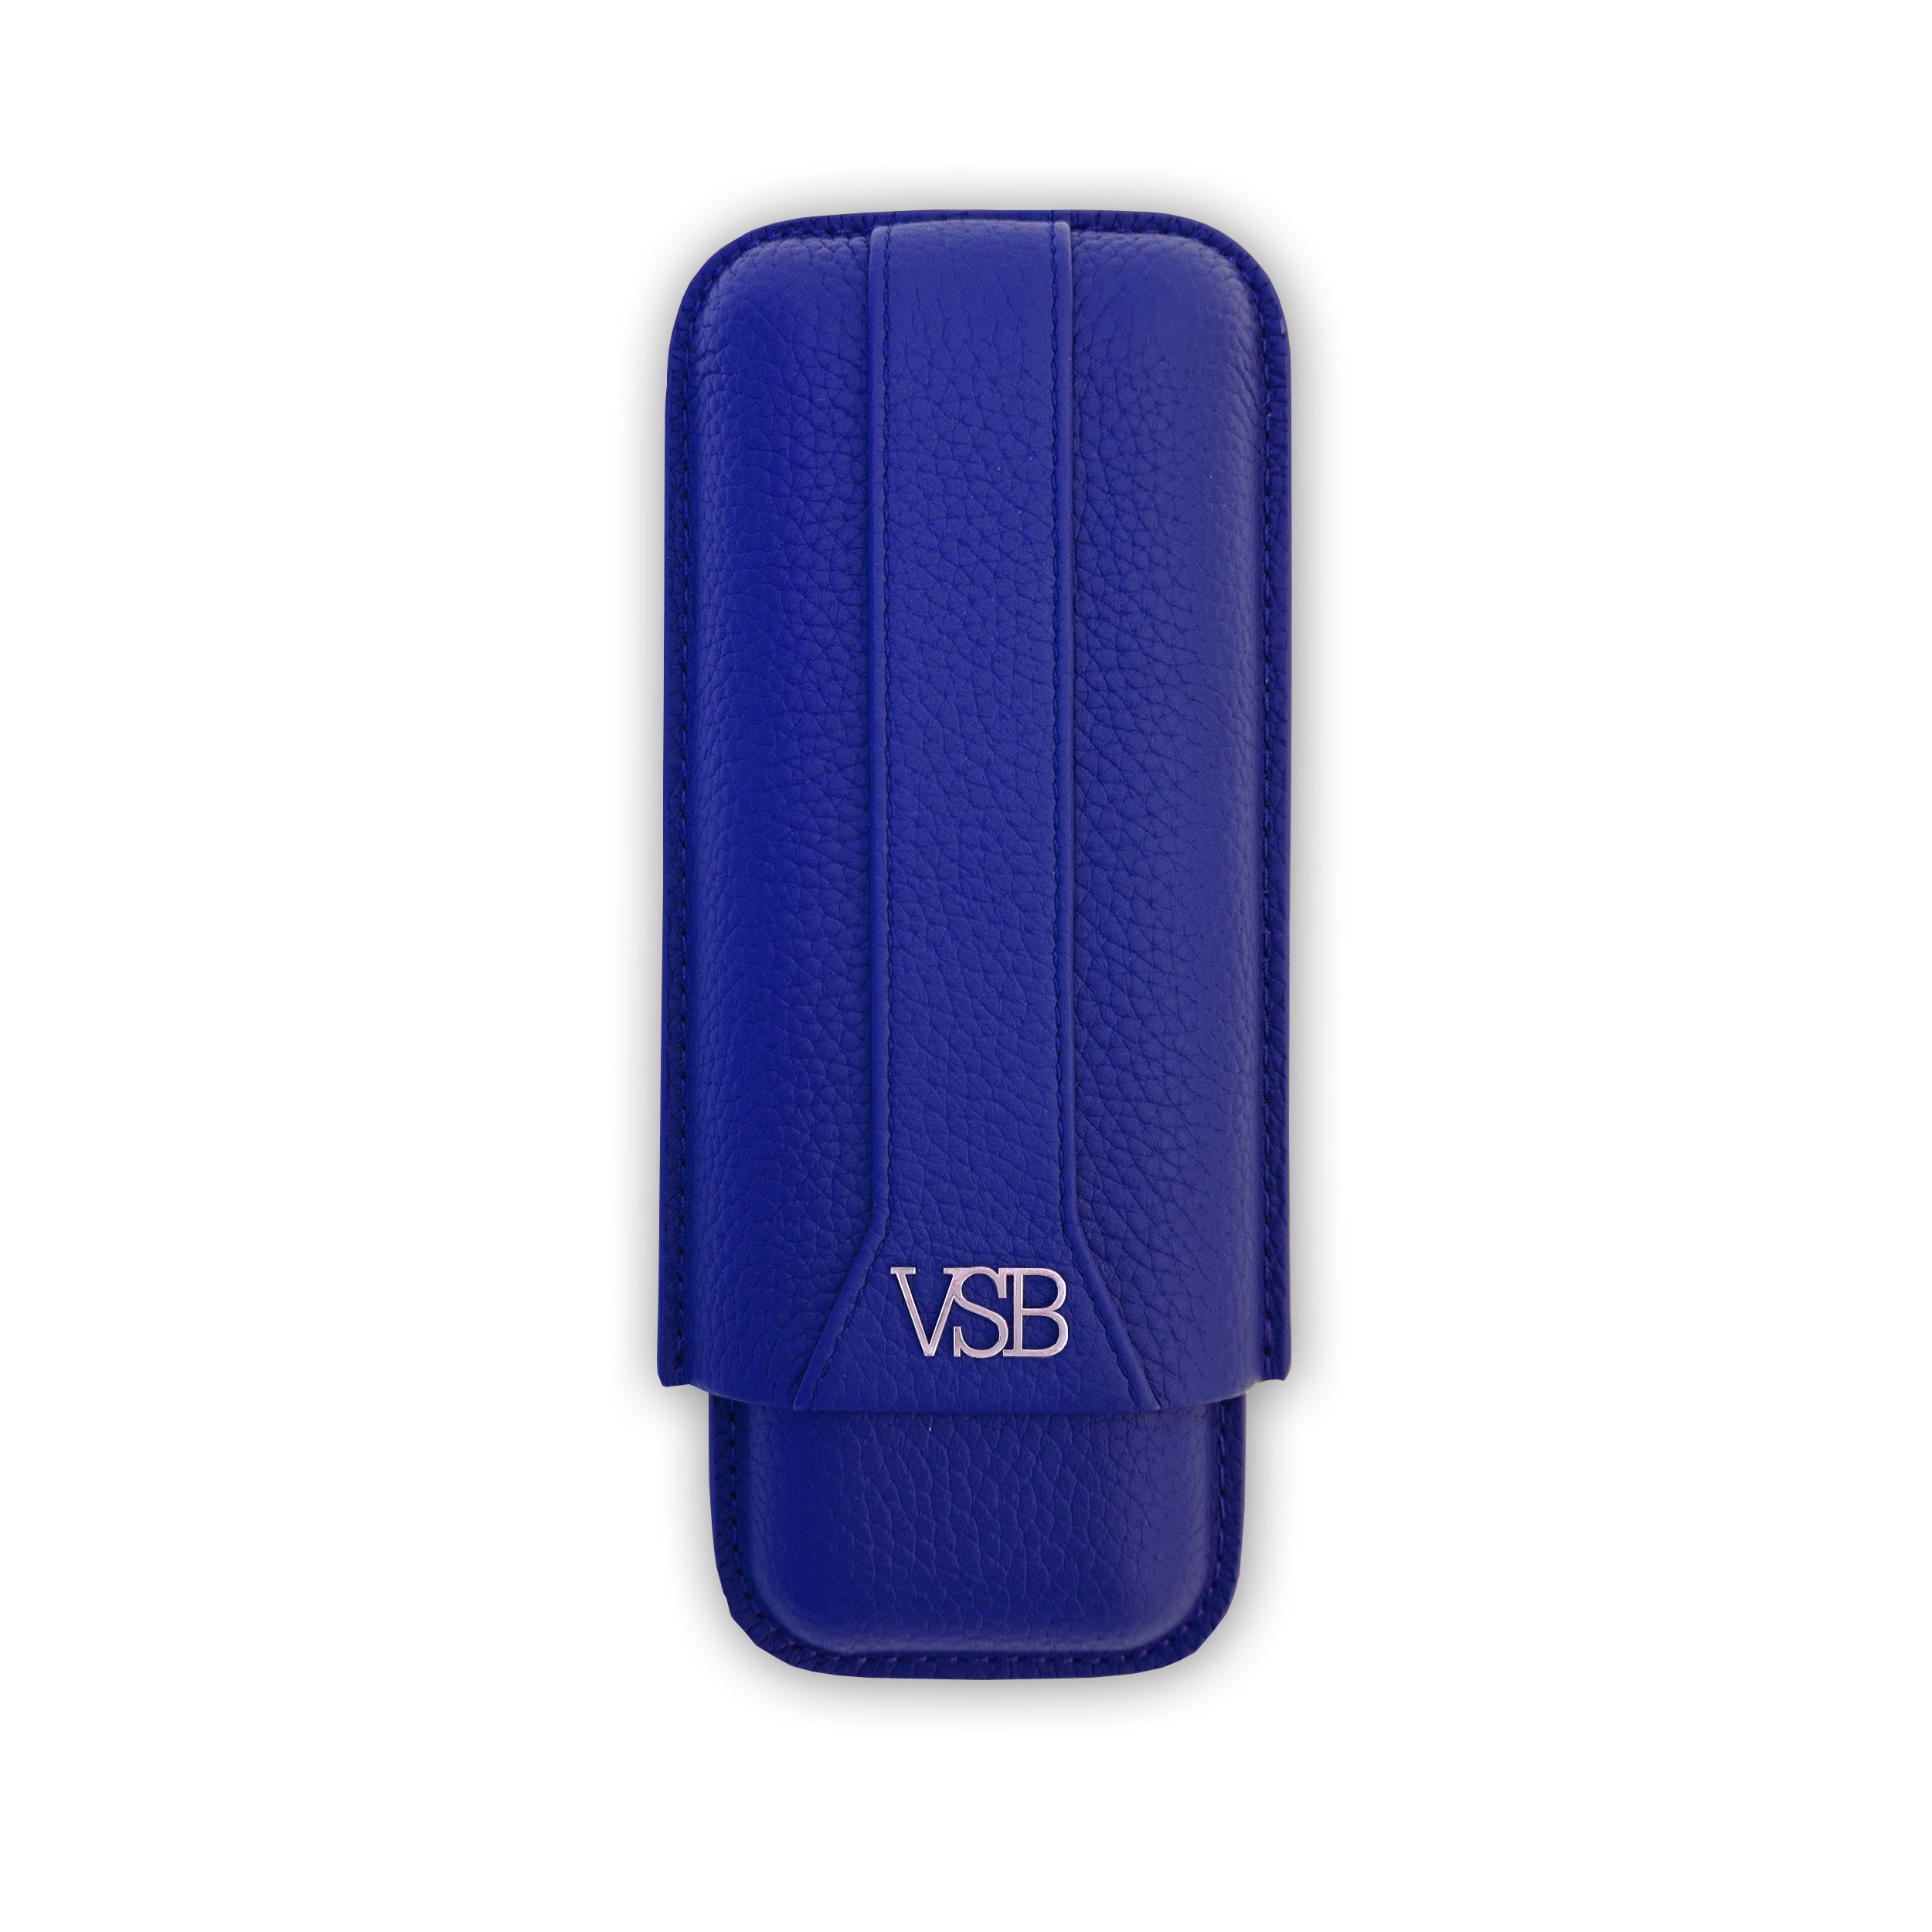 Two Finger Blue Leather Cigar Pouch - VSB London